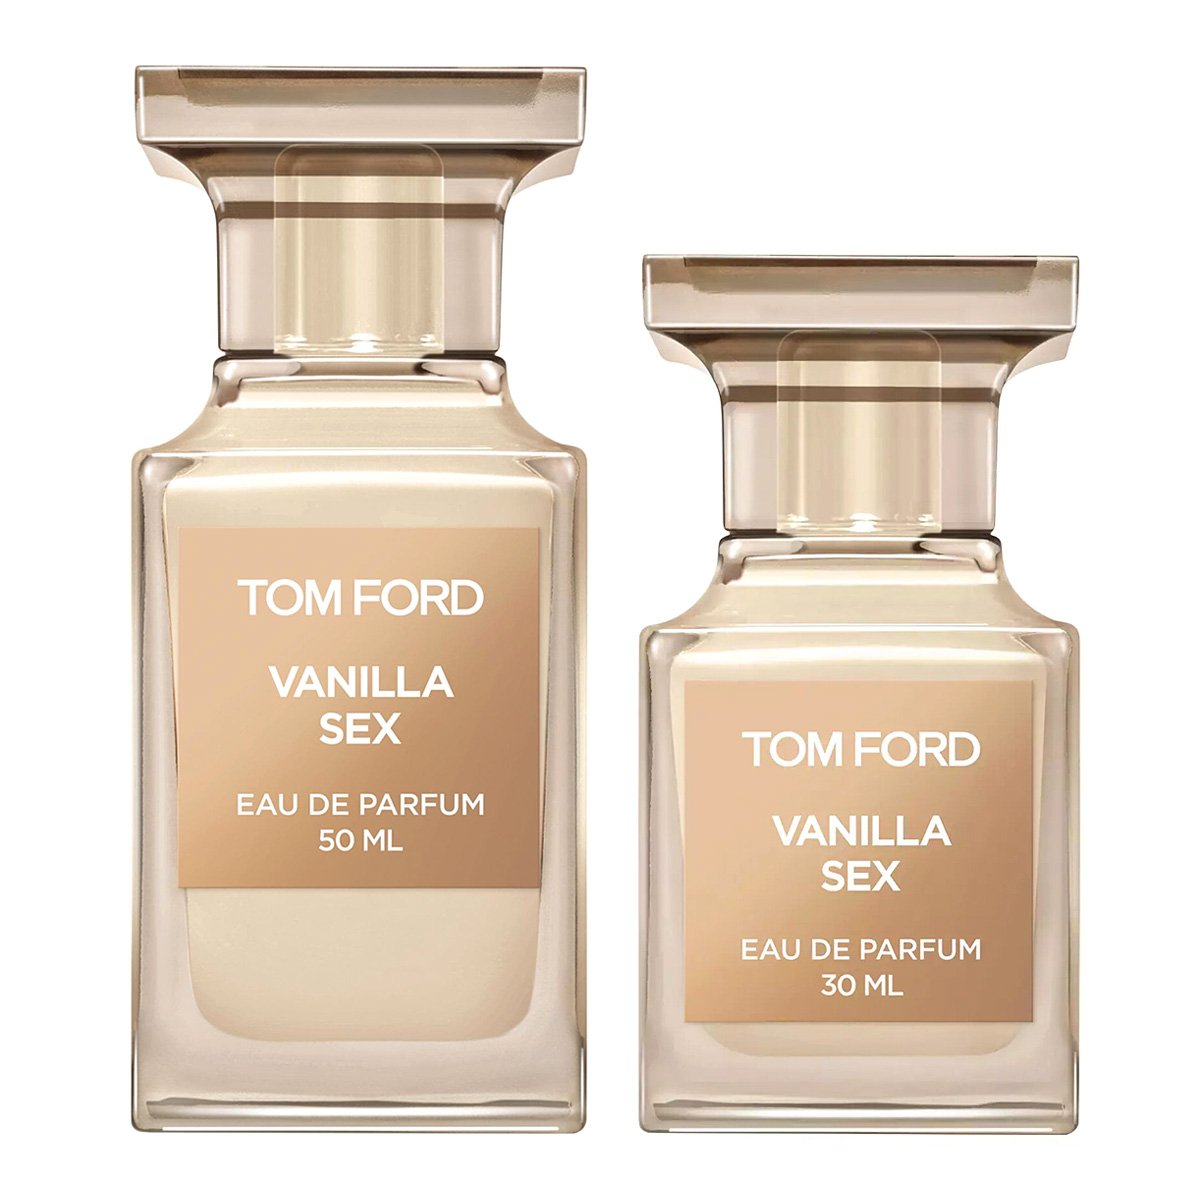 Vanilla Sex: Tom Ford, Are You Serious? ~ Fragrance Reviews